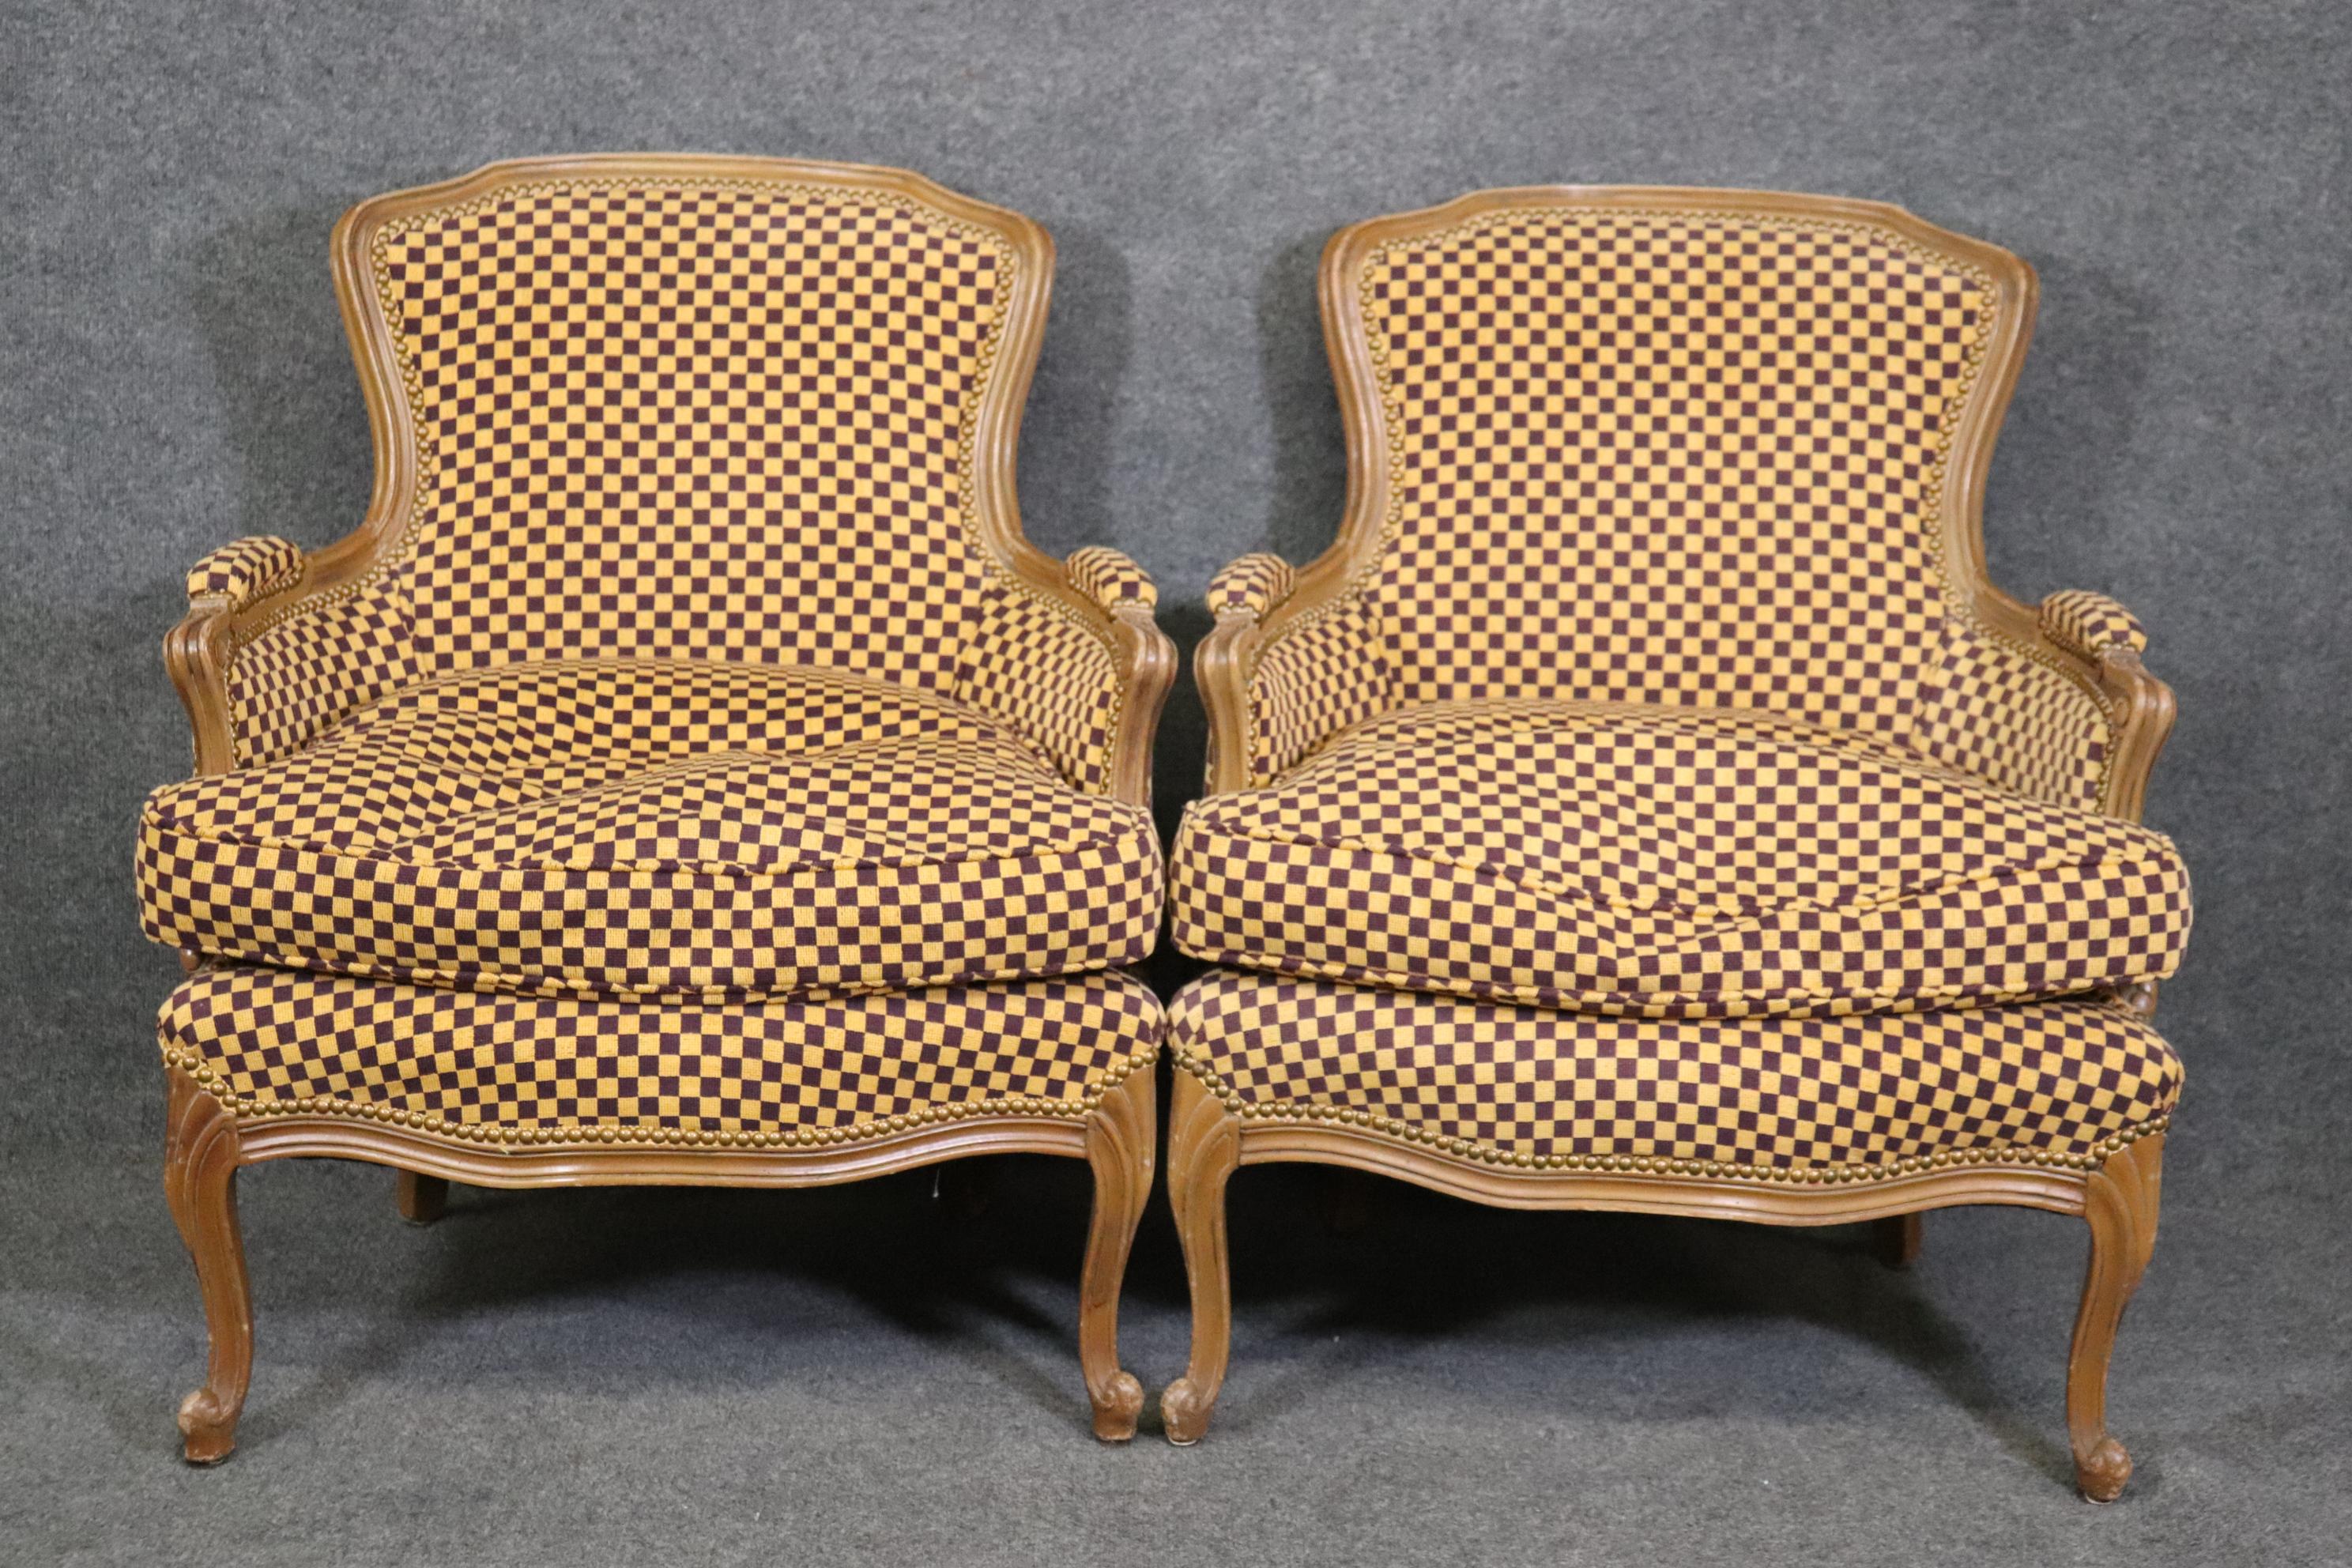 This is a beautiful pair of French Louis XV style bergeres. They are upholstered in vintage yellow and lavender upholstery with a checkerboard pattern. The chairs date to the 1960s and will show signs of wear and use. The chairs measure 39 tall x 29